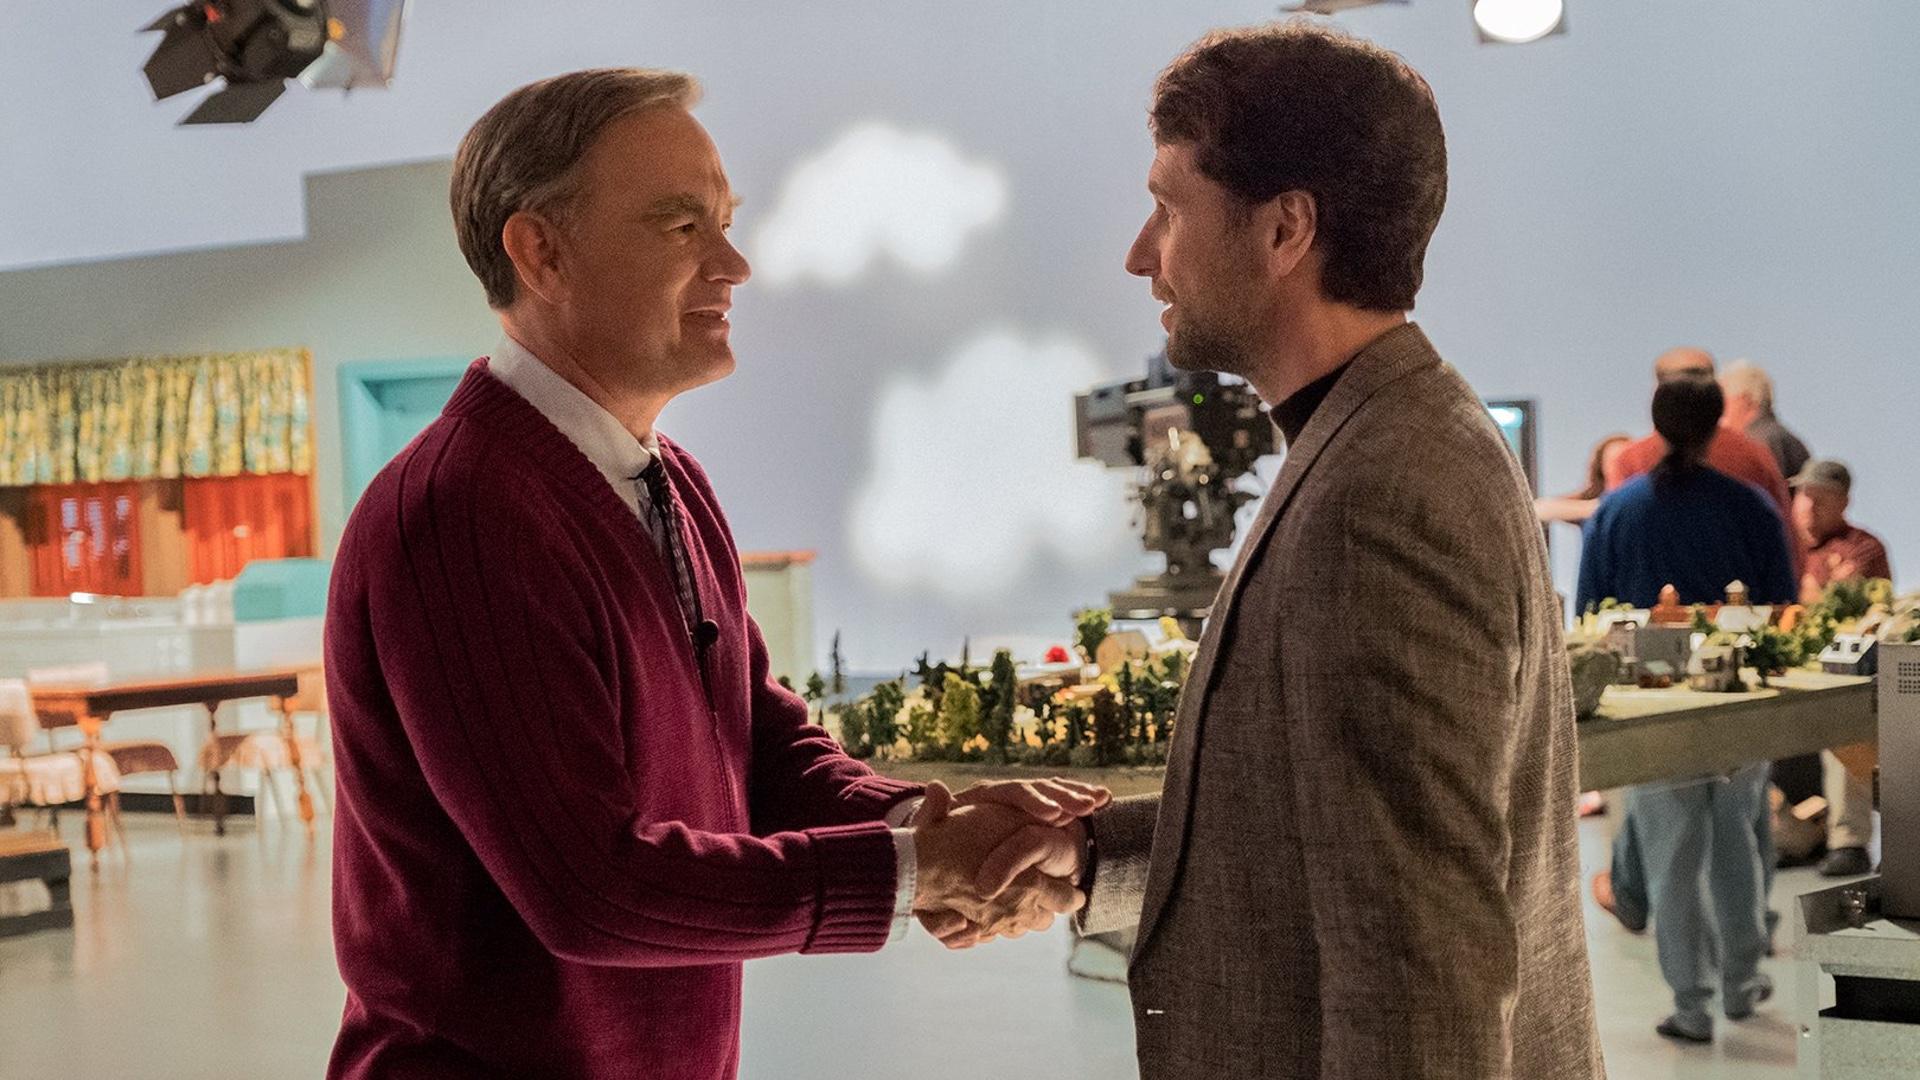 New Photo of Tom Hanks as Fred Rogers in A BEAUTIFUL DAY IN